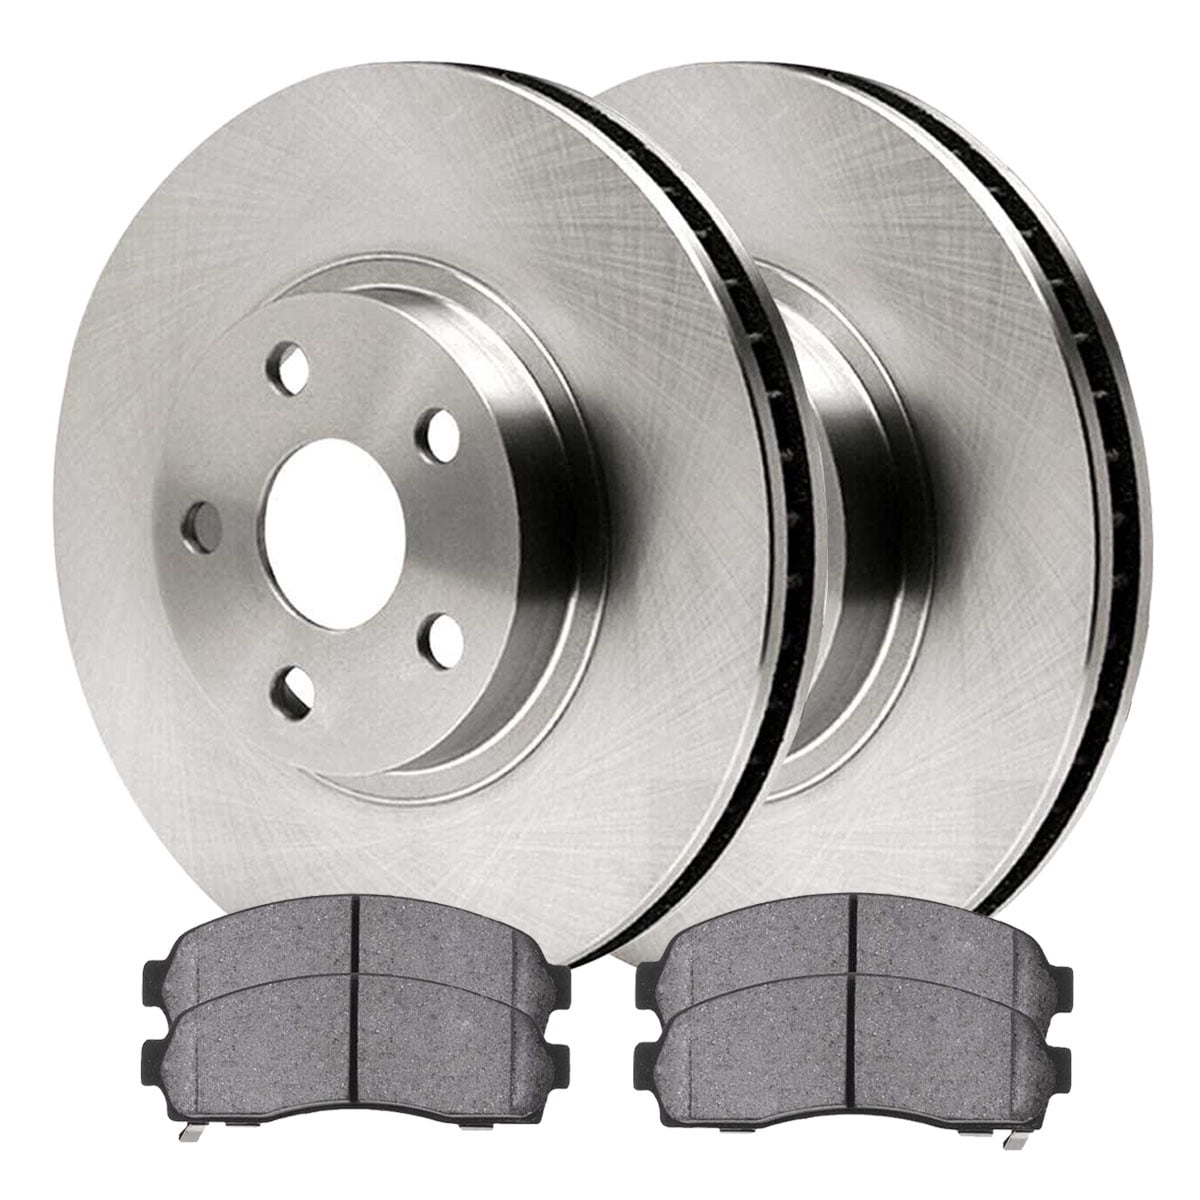 Fits 2002-2005 Ford Explorer Mercury Mountaineer Front+Rear Solid Brake Rotors